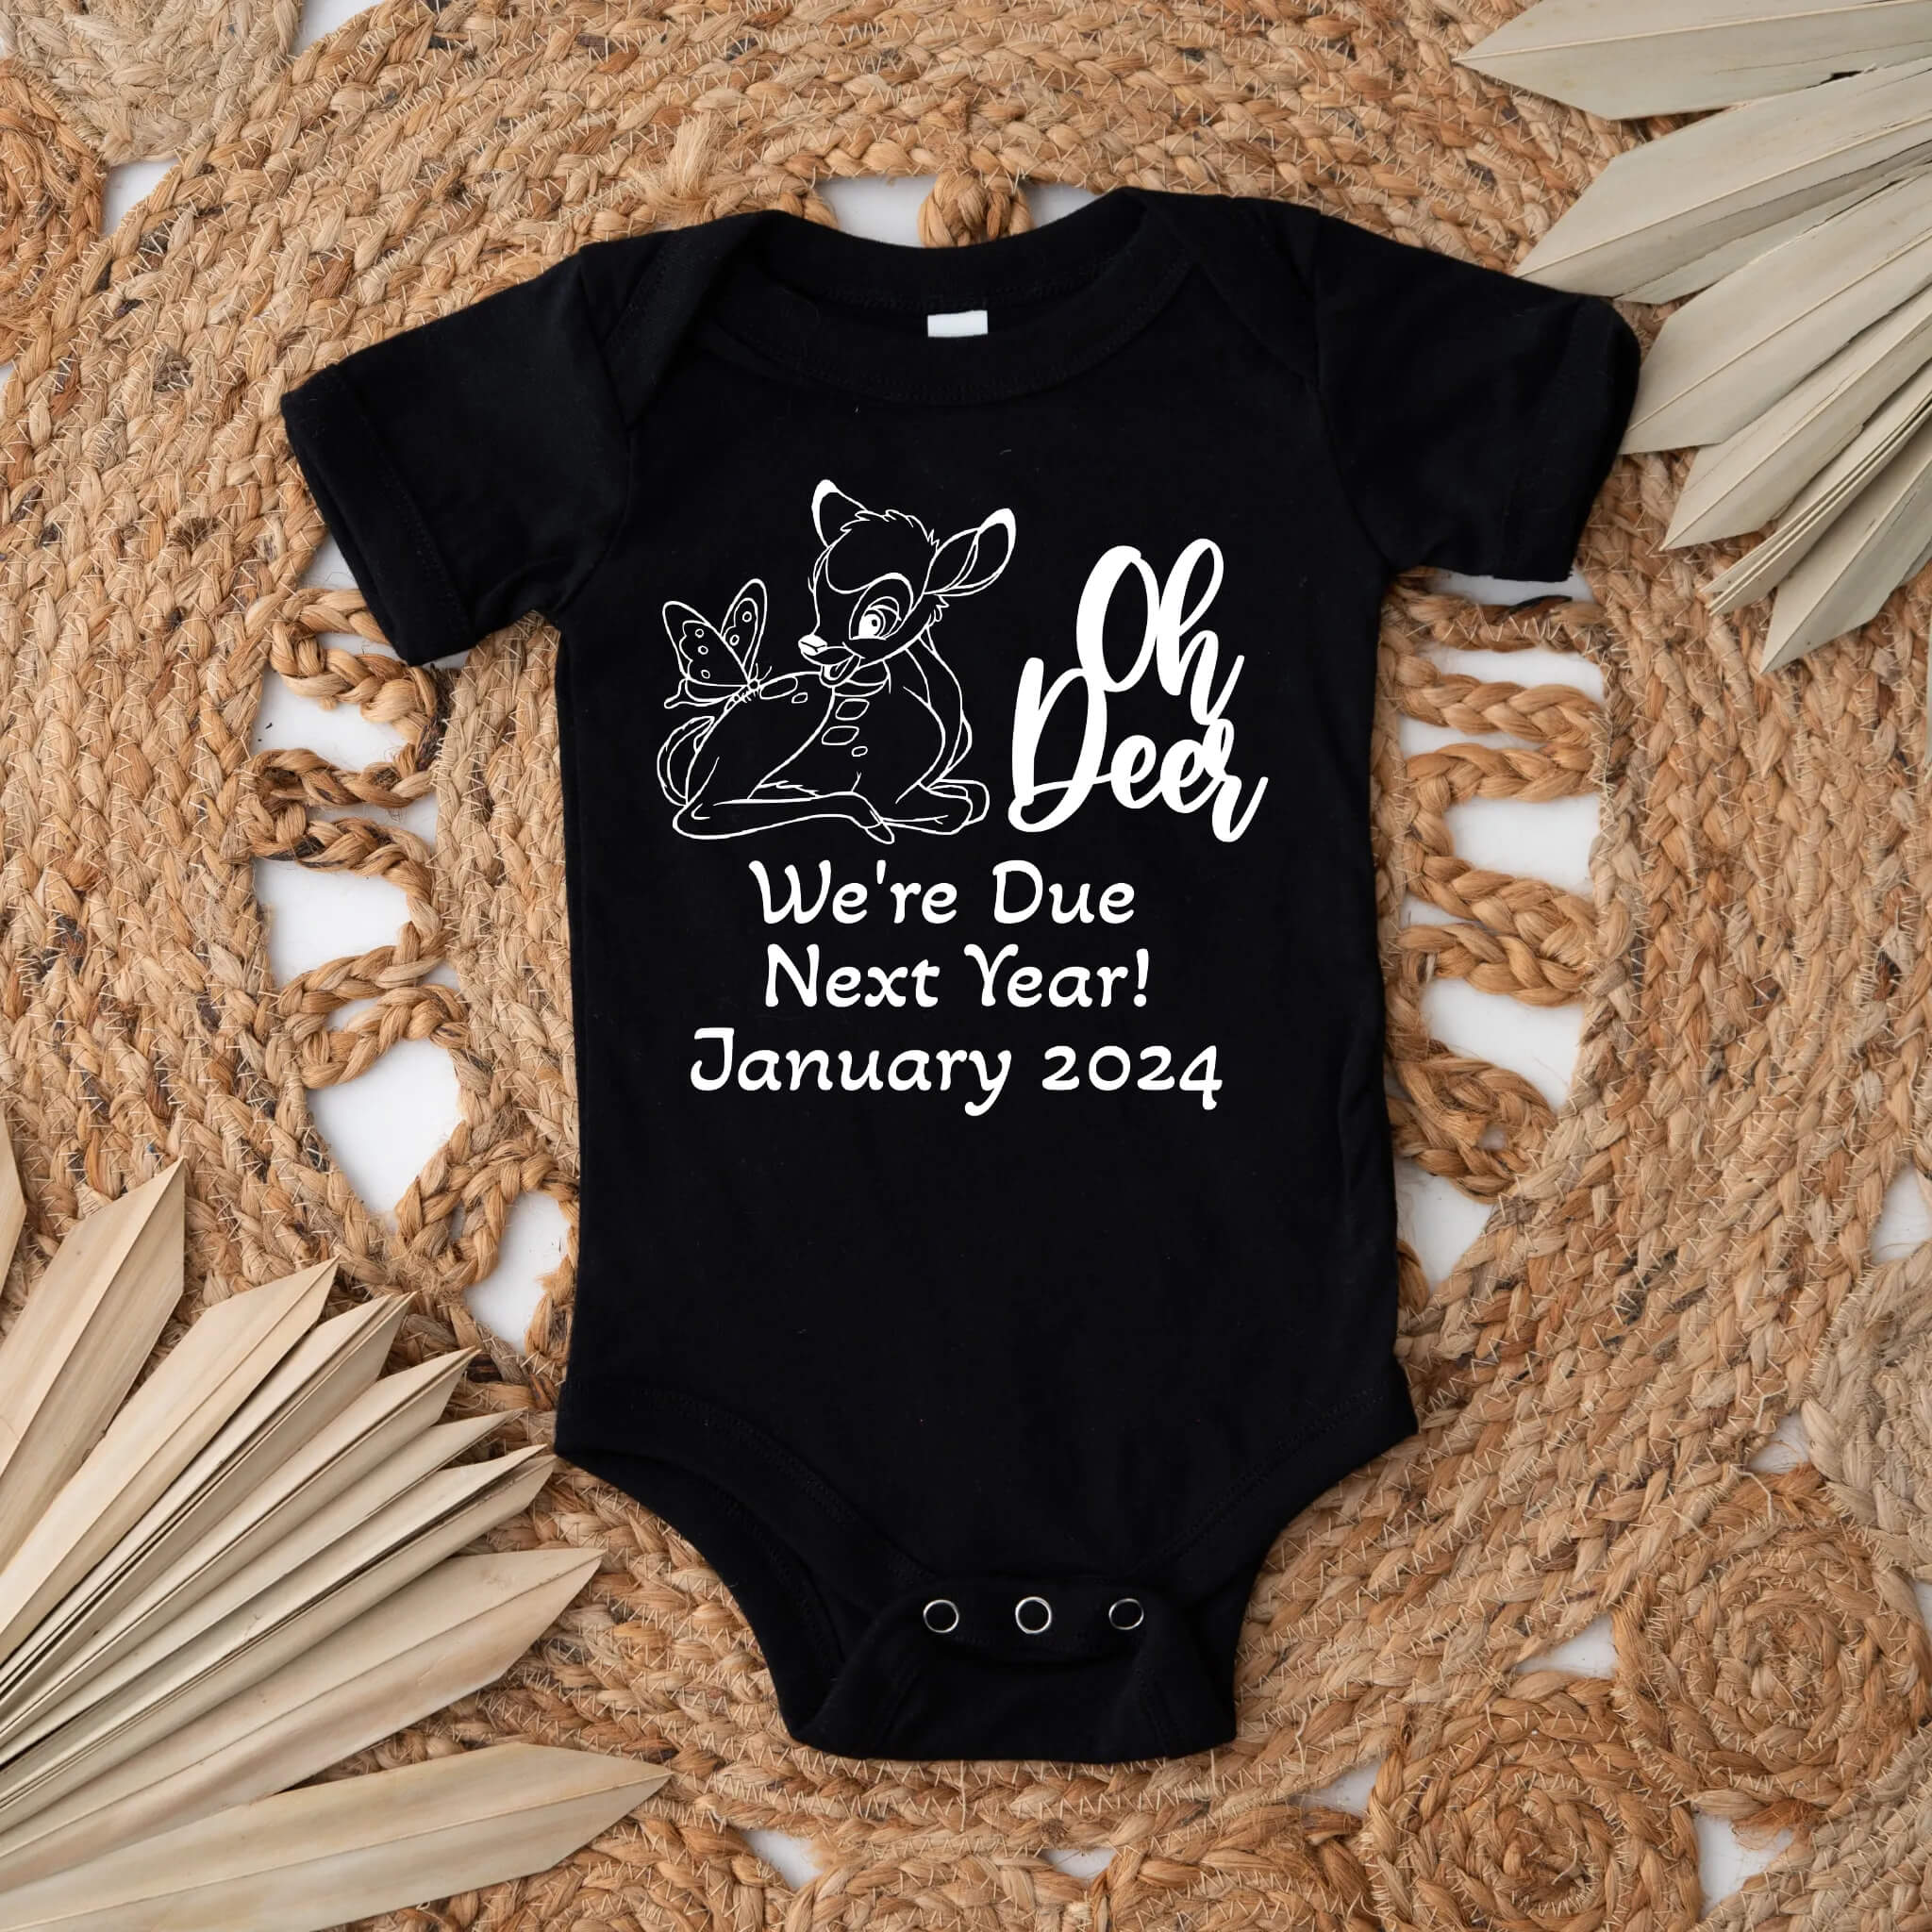 Personalized Pregnancy Announcement, Oh Deer We’re Due Next Year, Dad, Grandma, Grandpa, Aunt, Uncle To Be, Customized Baby Fawn Announcement, Social Media Announcement, Gift Box Baby Announcement, Animated Movie Characters Pregnancy Announcement